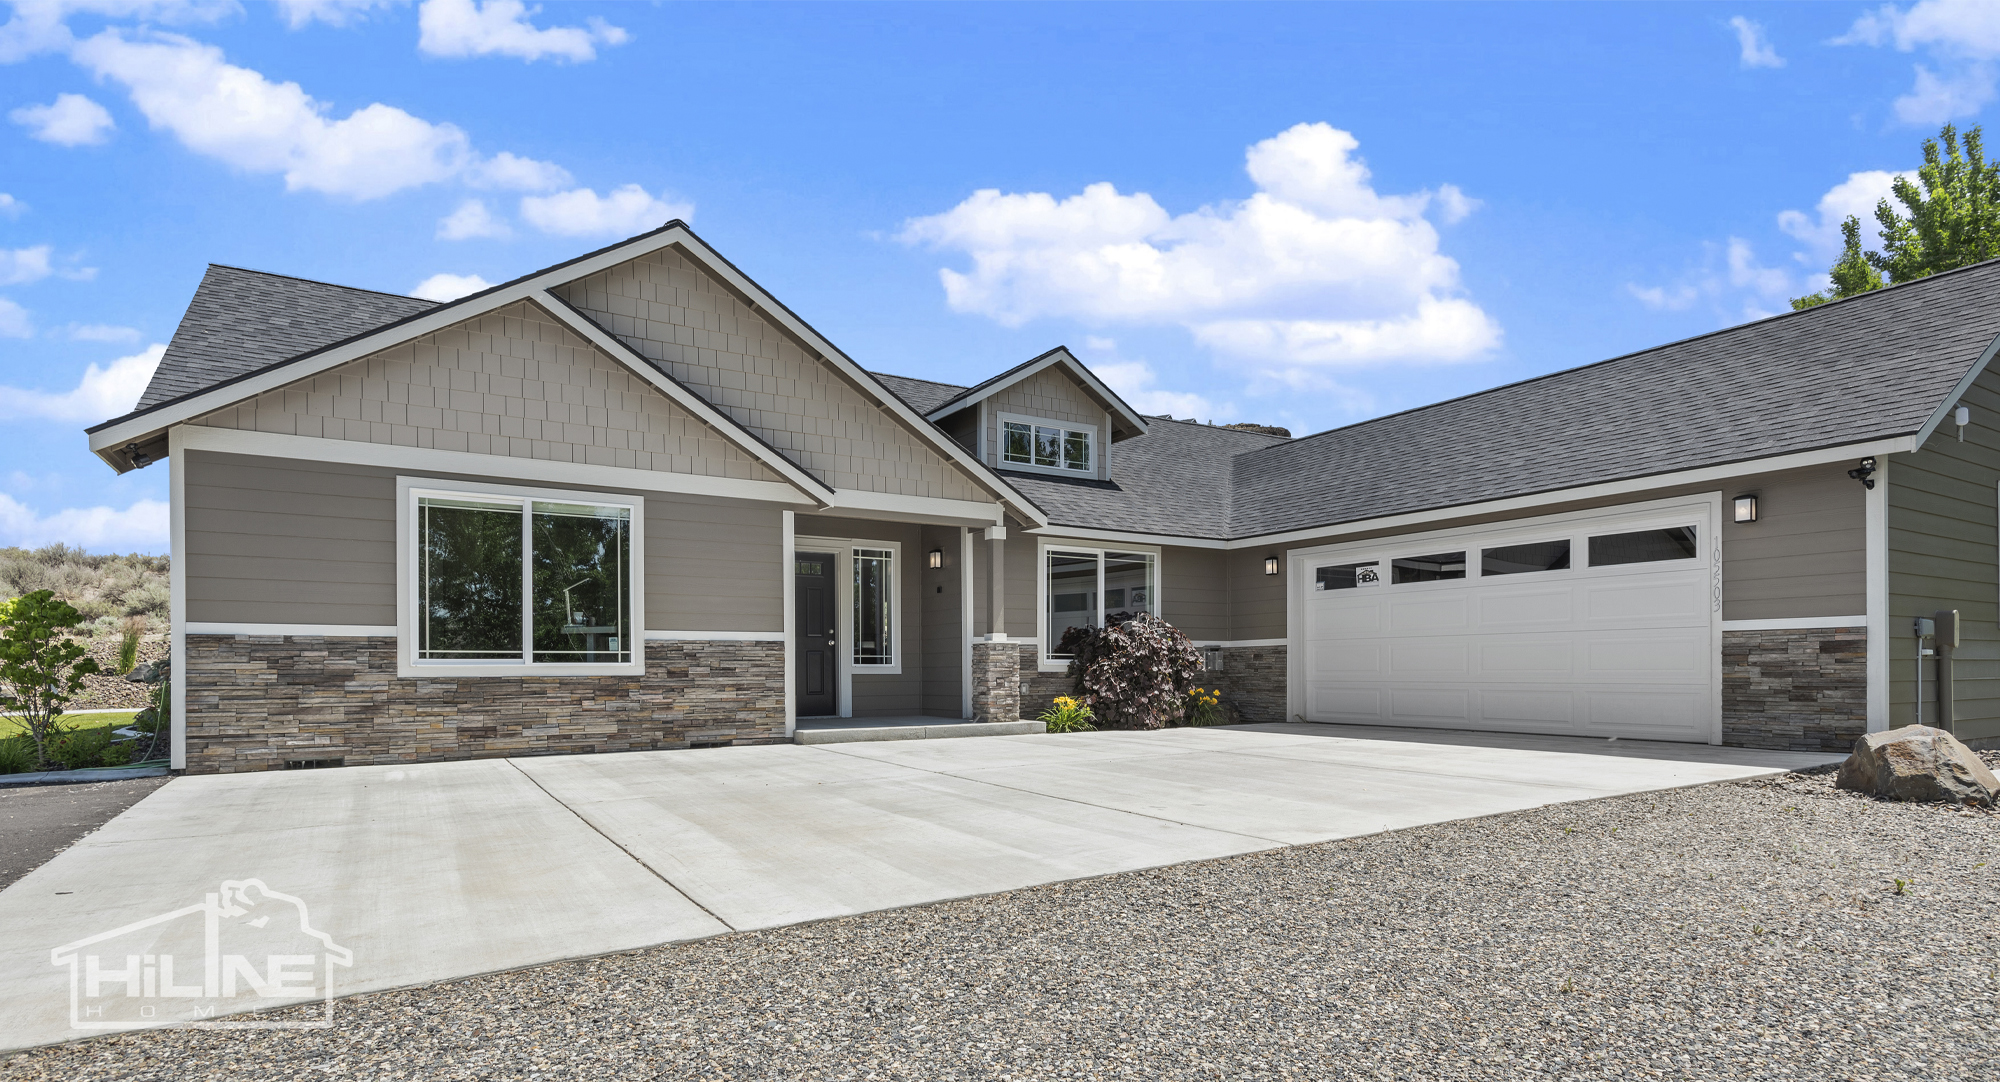 Image of Front Exterior HiLine Homes of Kennewick